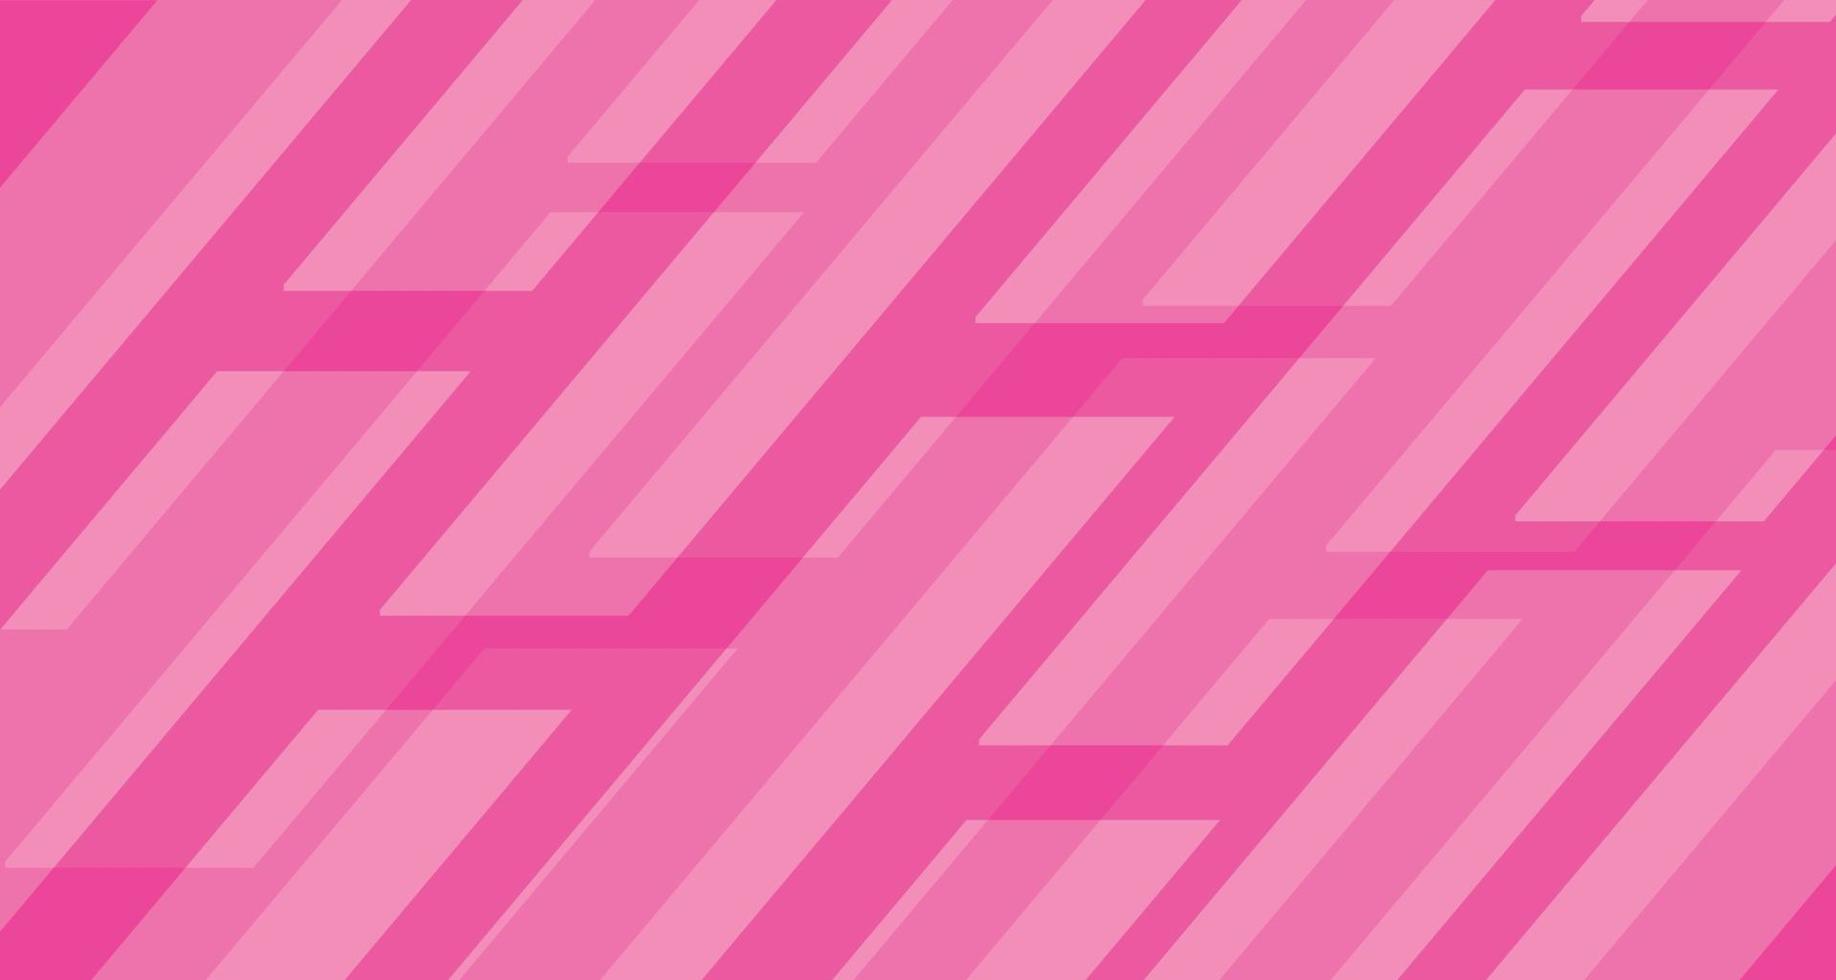 abstract pink background vector